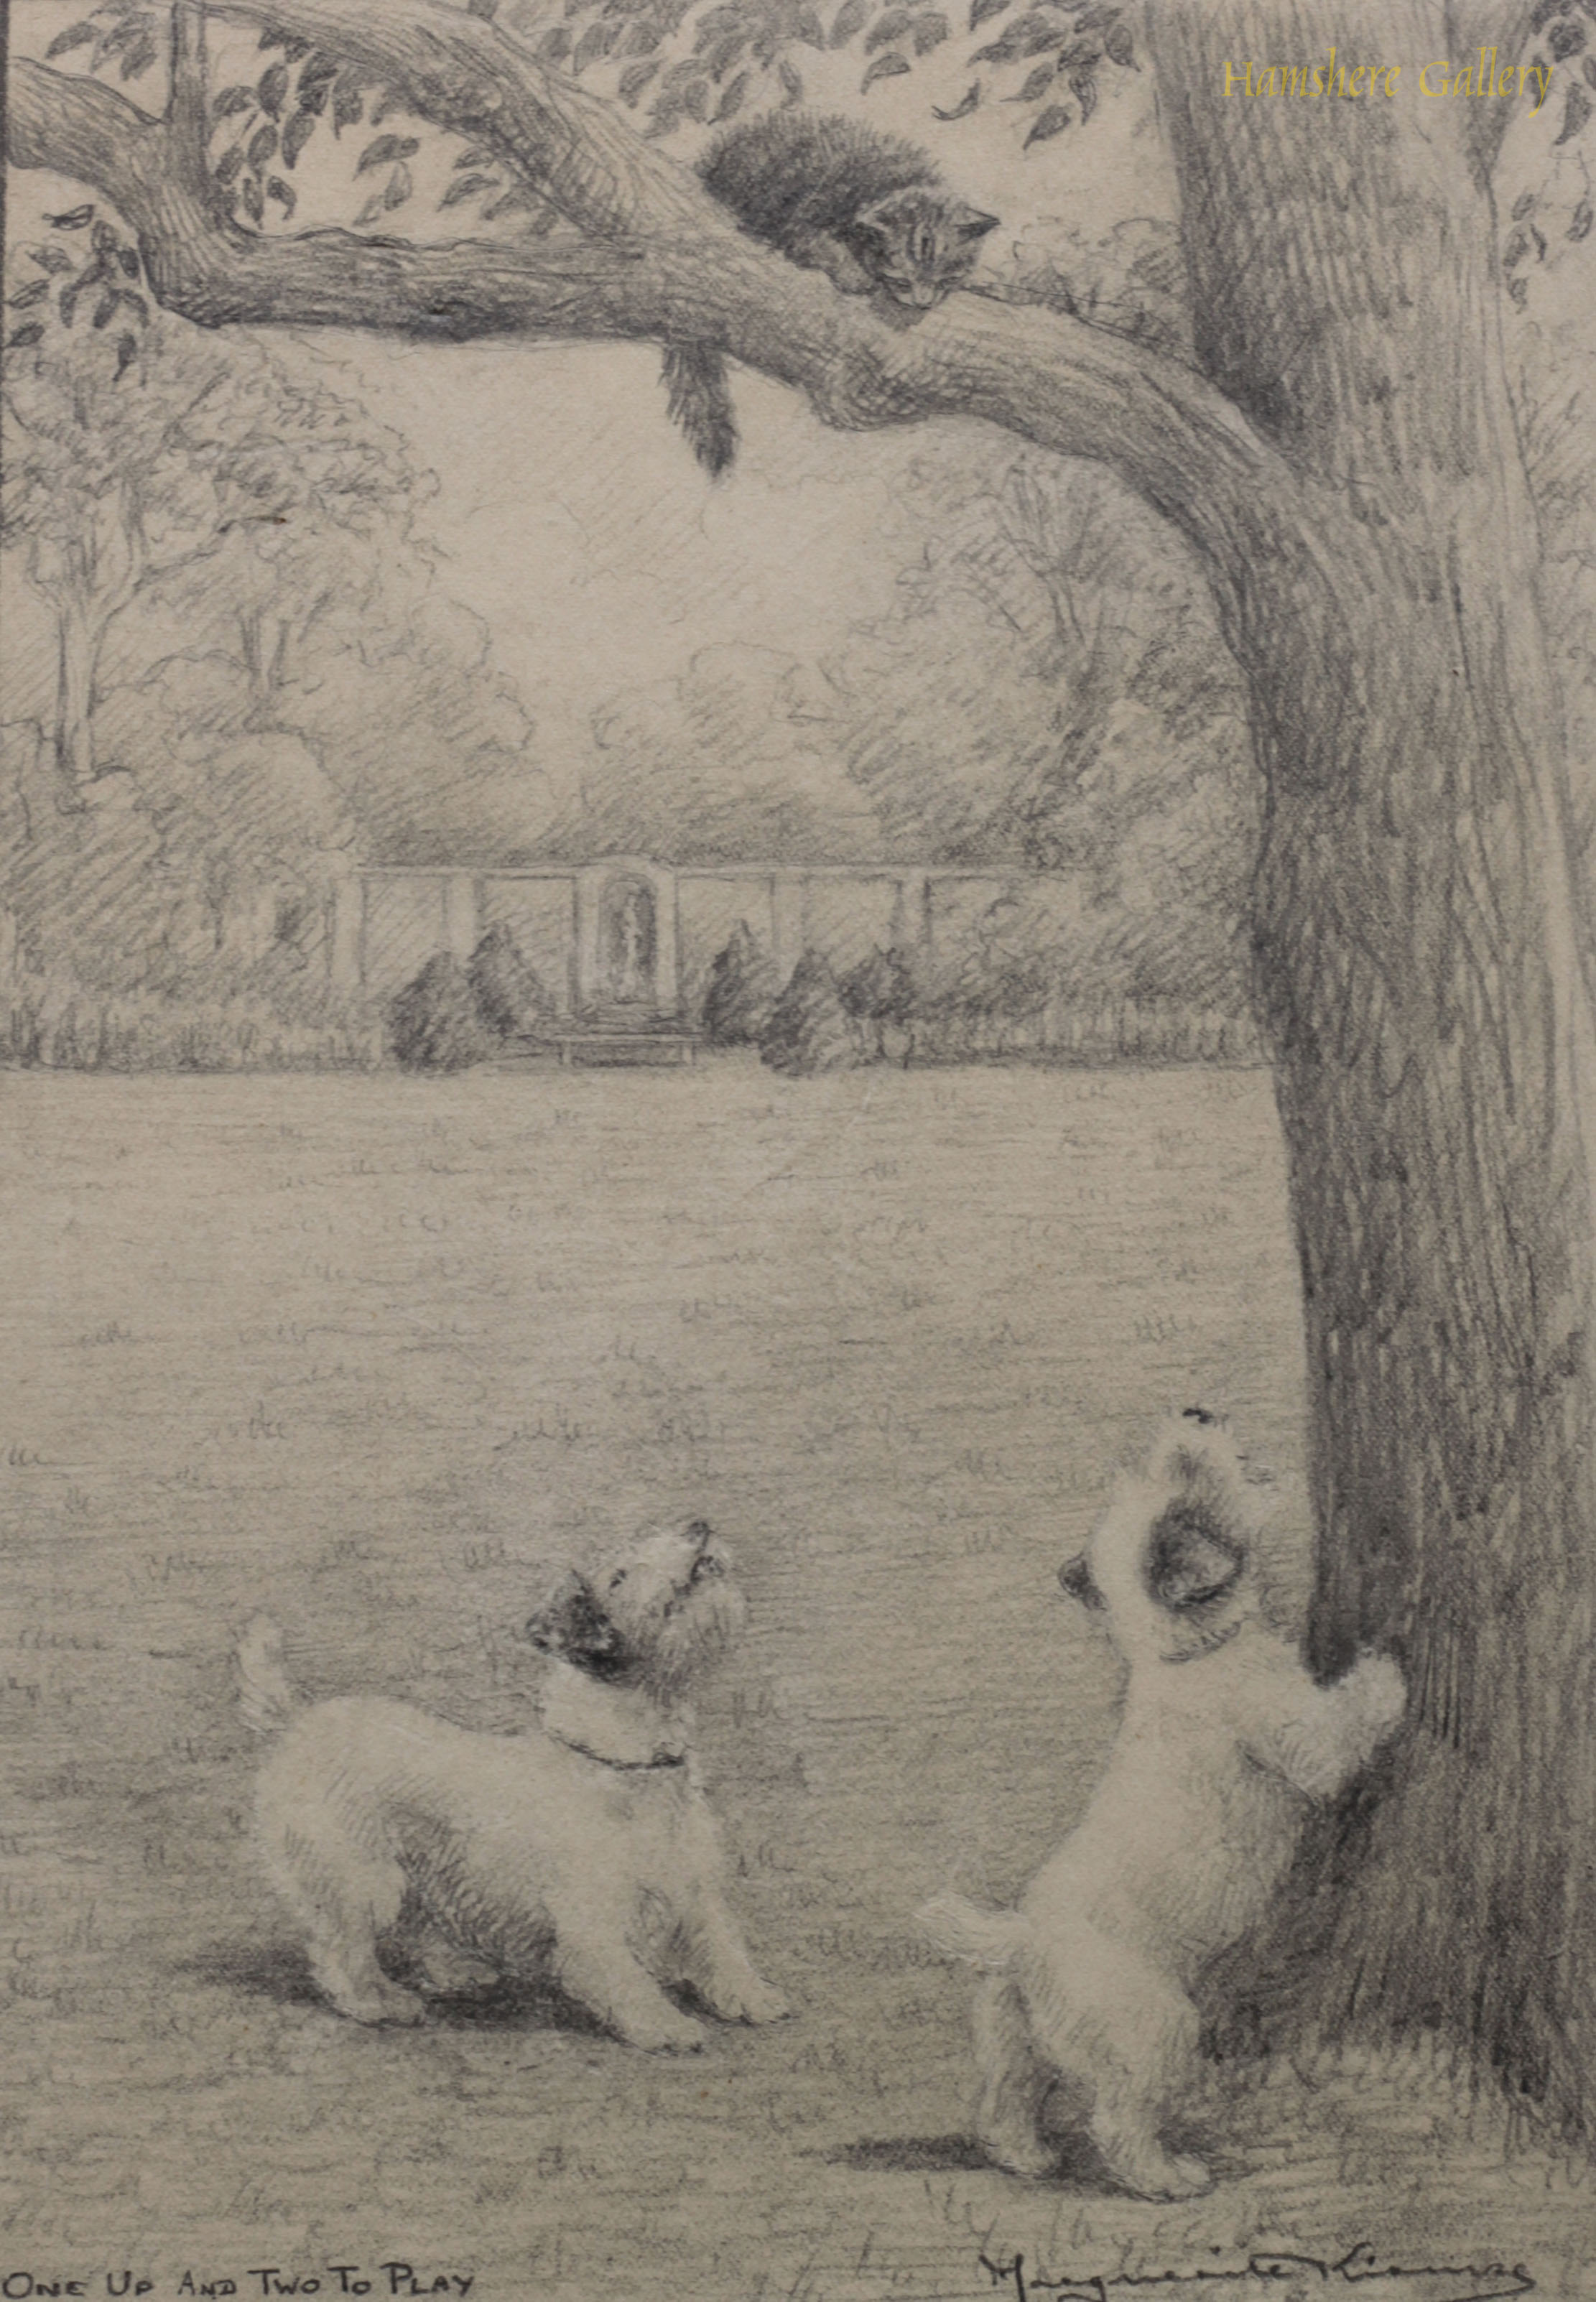 Click to see full size: Sealyham  pencil drawing Two Up and One to Play by Marguerite Kirmse